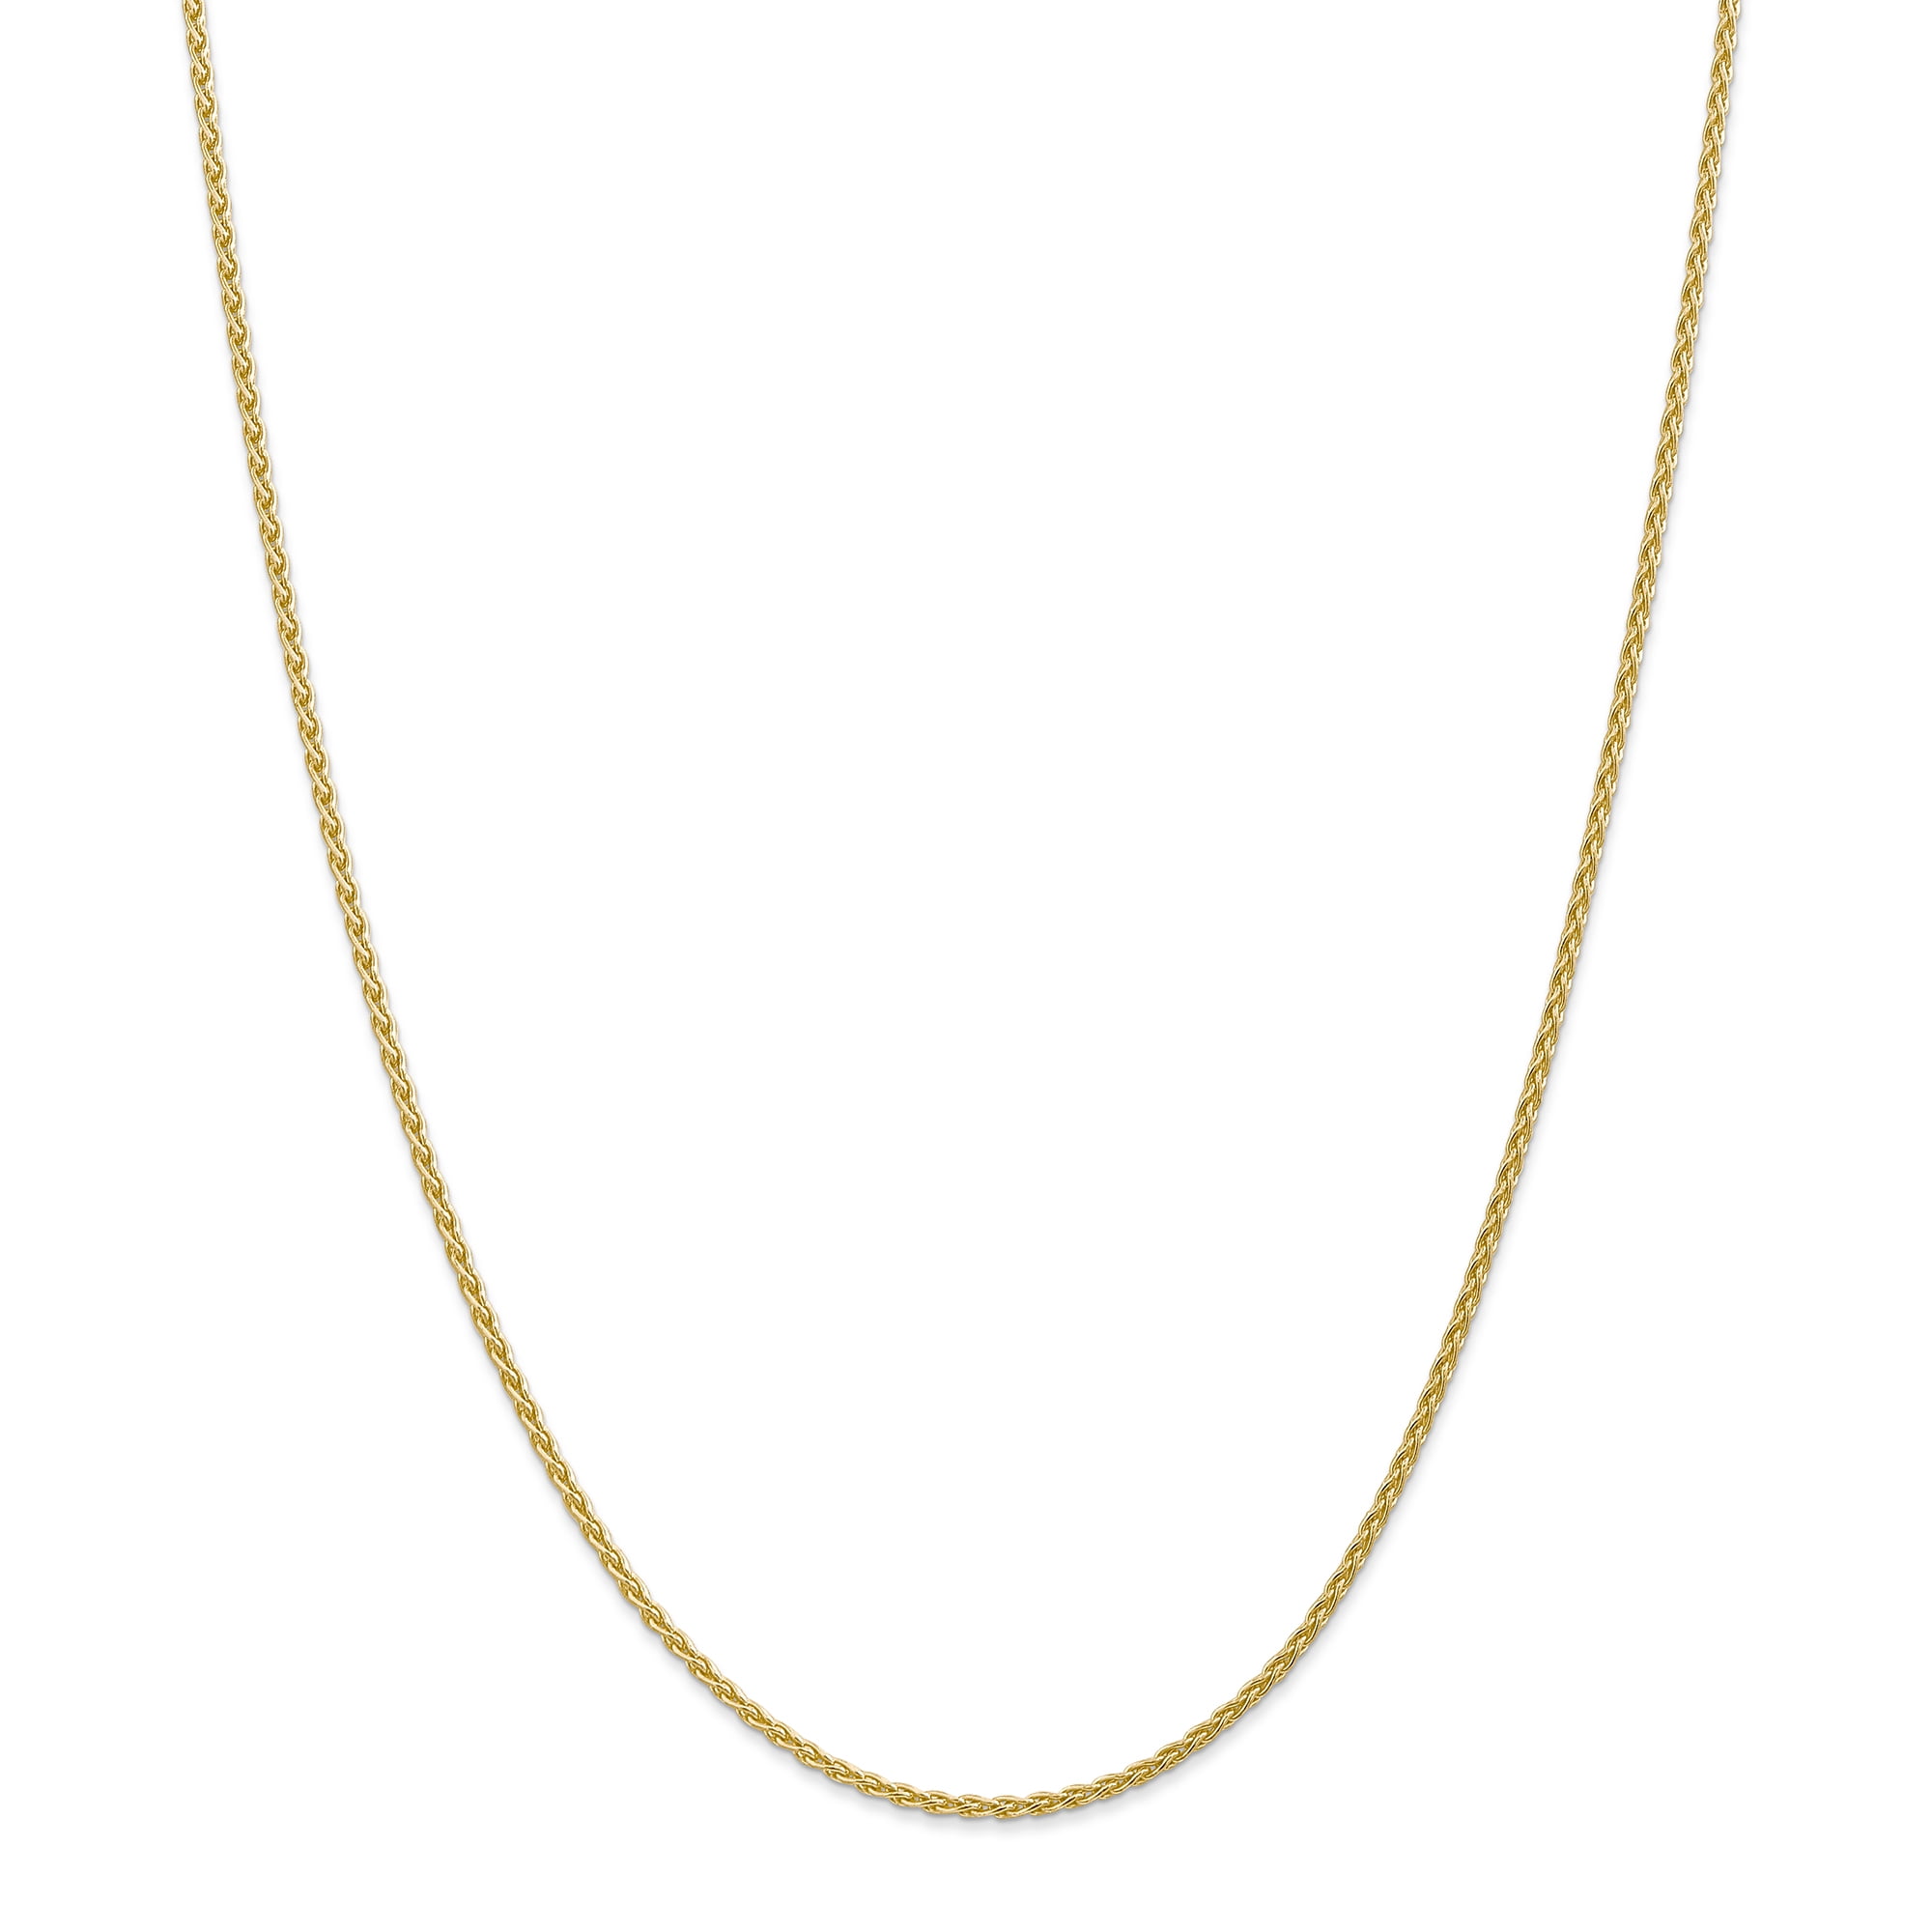 16-24 Inches Paradise Jewelers 14K Solid Gold 1.5mm Hollow Rope Chain Spring Clasp 